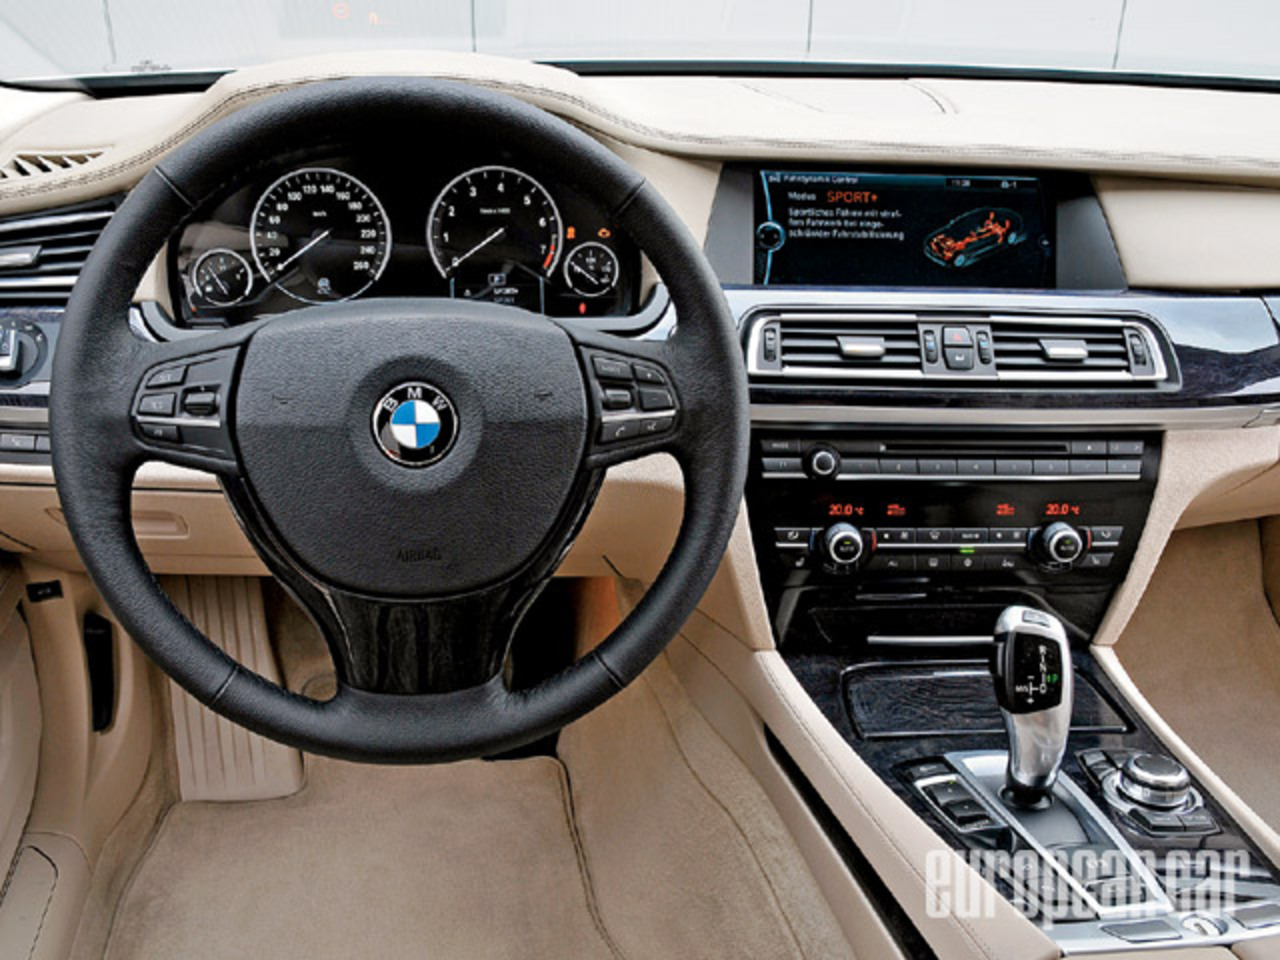 Read what our editors have to say as they review the new 2009 BMW 750Li